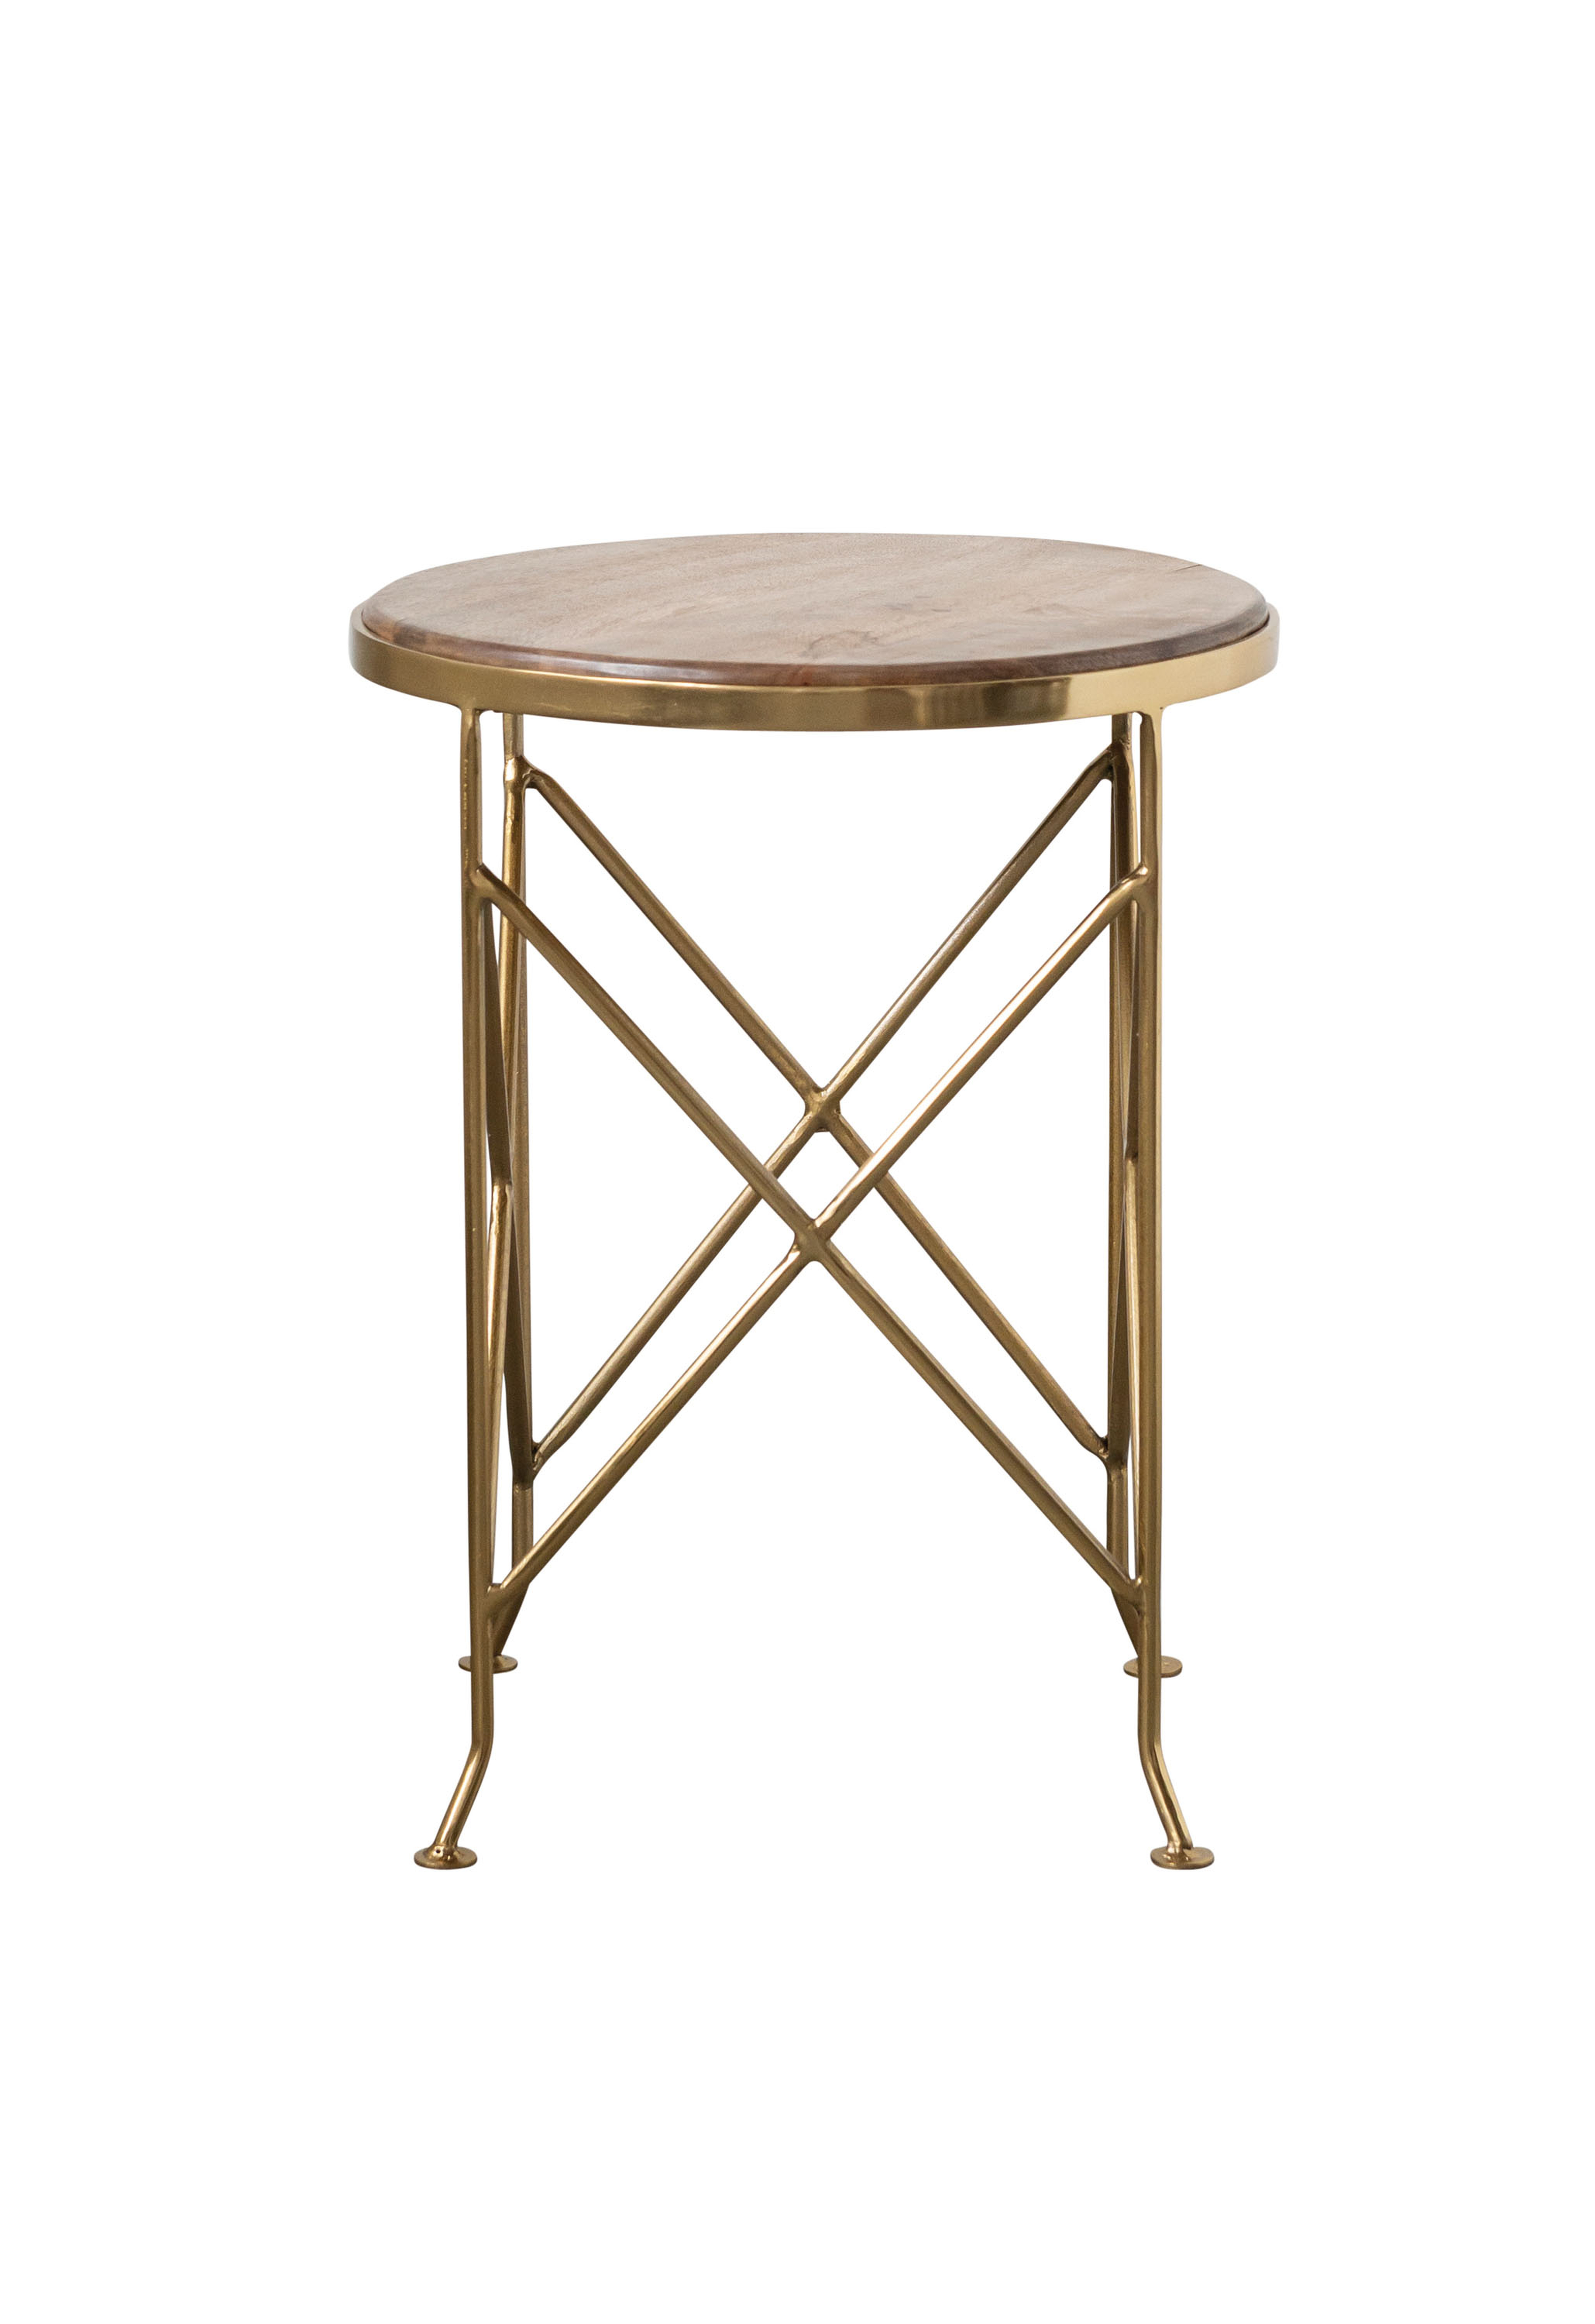 Brown Mango Wood Side Table with Gold Metal Legs - Nomad Home